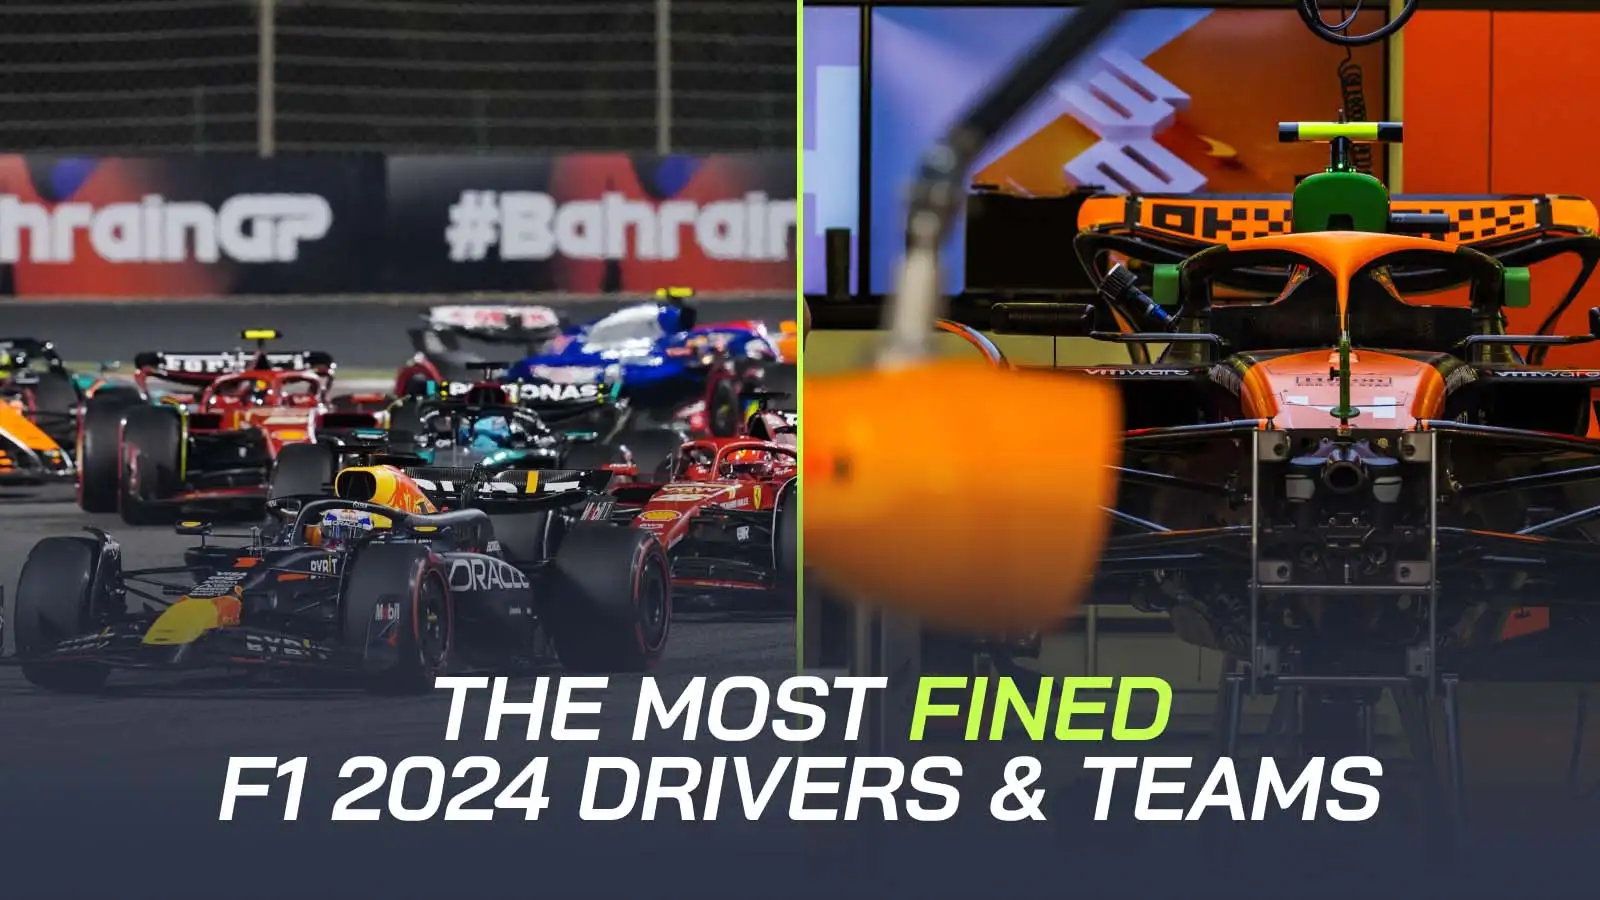 Revealed: The most fined drivers and teams on the F1 2024 grid